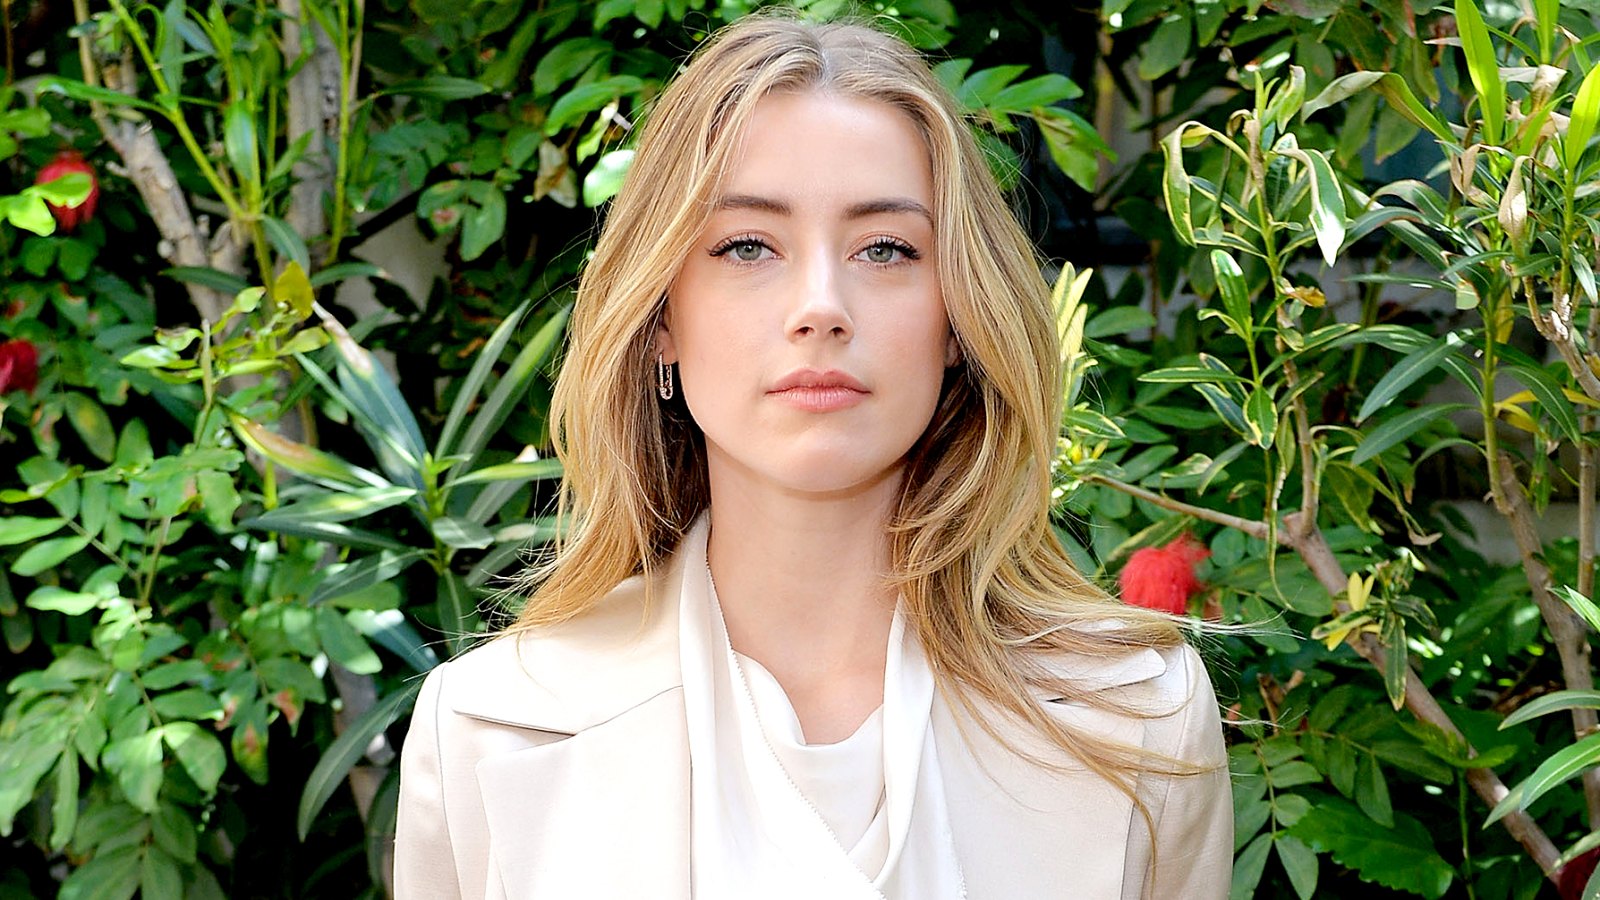 Amber Heard attends Net-A-Porter Celebrates Women Behind The Lens at Chateau Marmont on February 26, 2016.